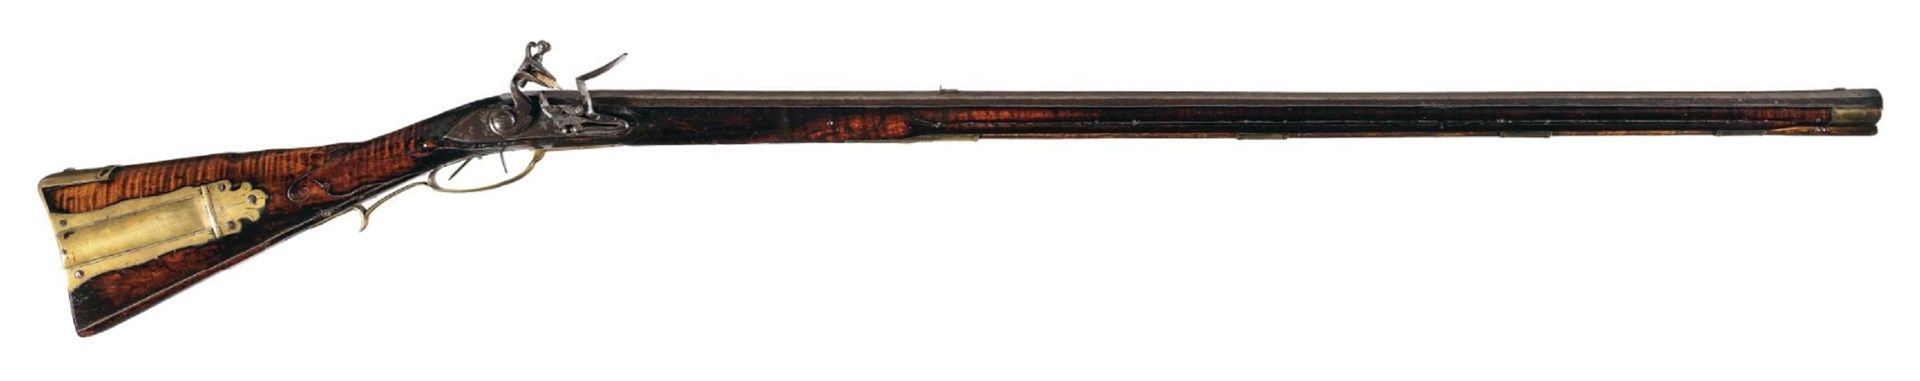 This Lancaster County, Pennsylvania, rifle was made by Jacob Dickert sometime between 1761 and the outbreak of the Revolutionary War. The best American marksmen could reliably hit targets at over 200 and even 300 yards with these Lancaster rifles “Courtesy of Rock Island Auction Company”